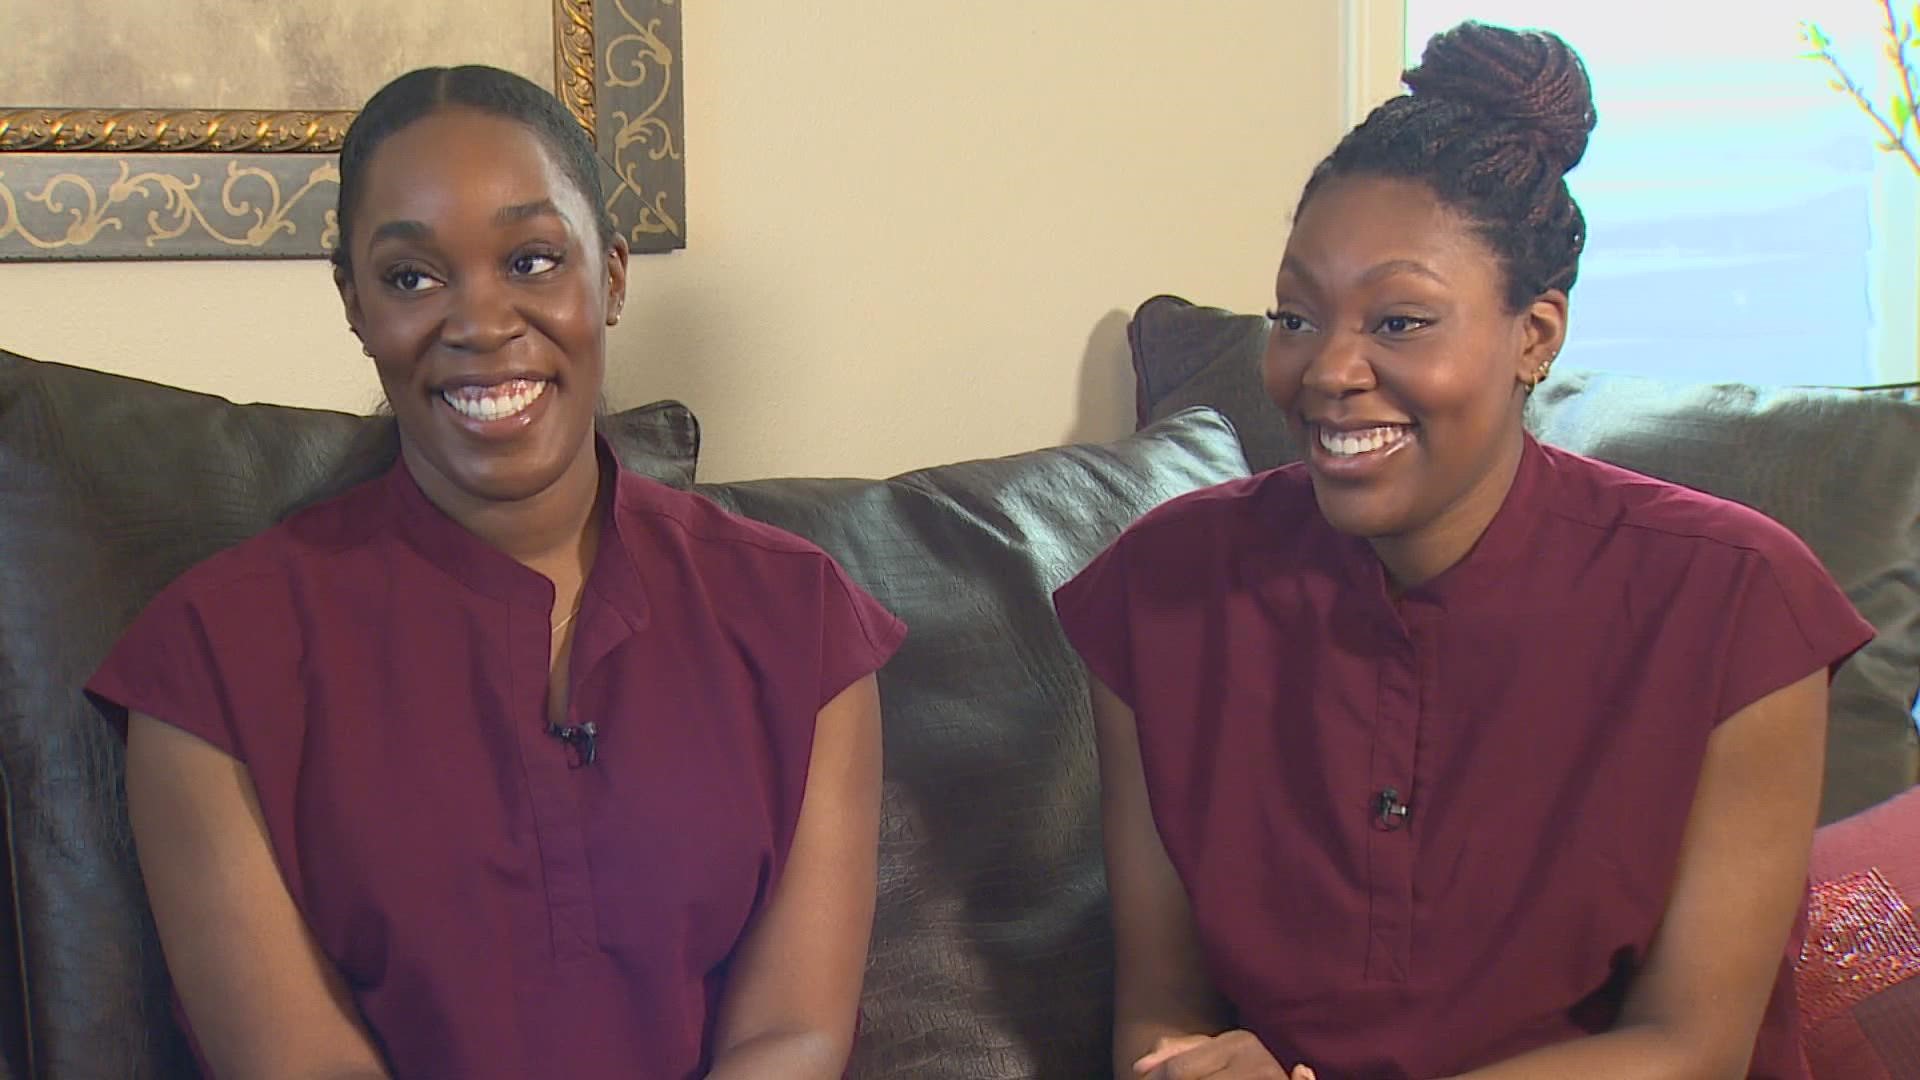 There aren’t a lot of black doctors in the U.S., but Patricia and Stephanie Egwuatu, who are from Auburn, are hoping to change that.